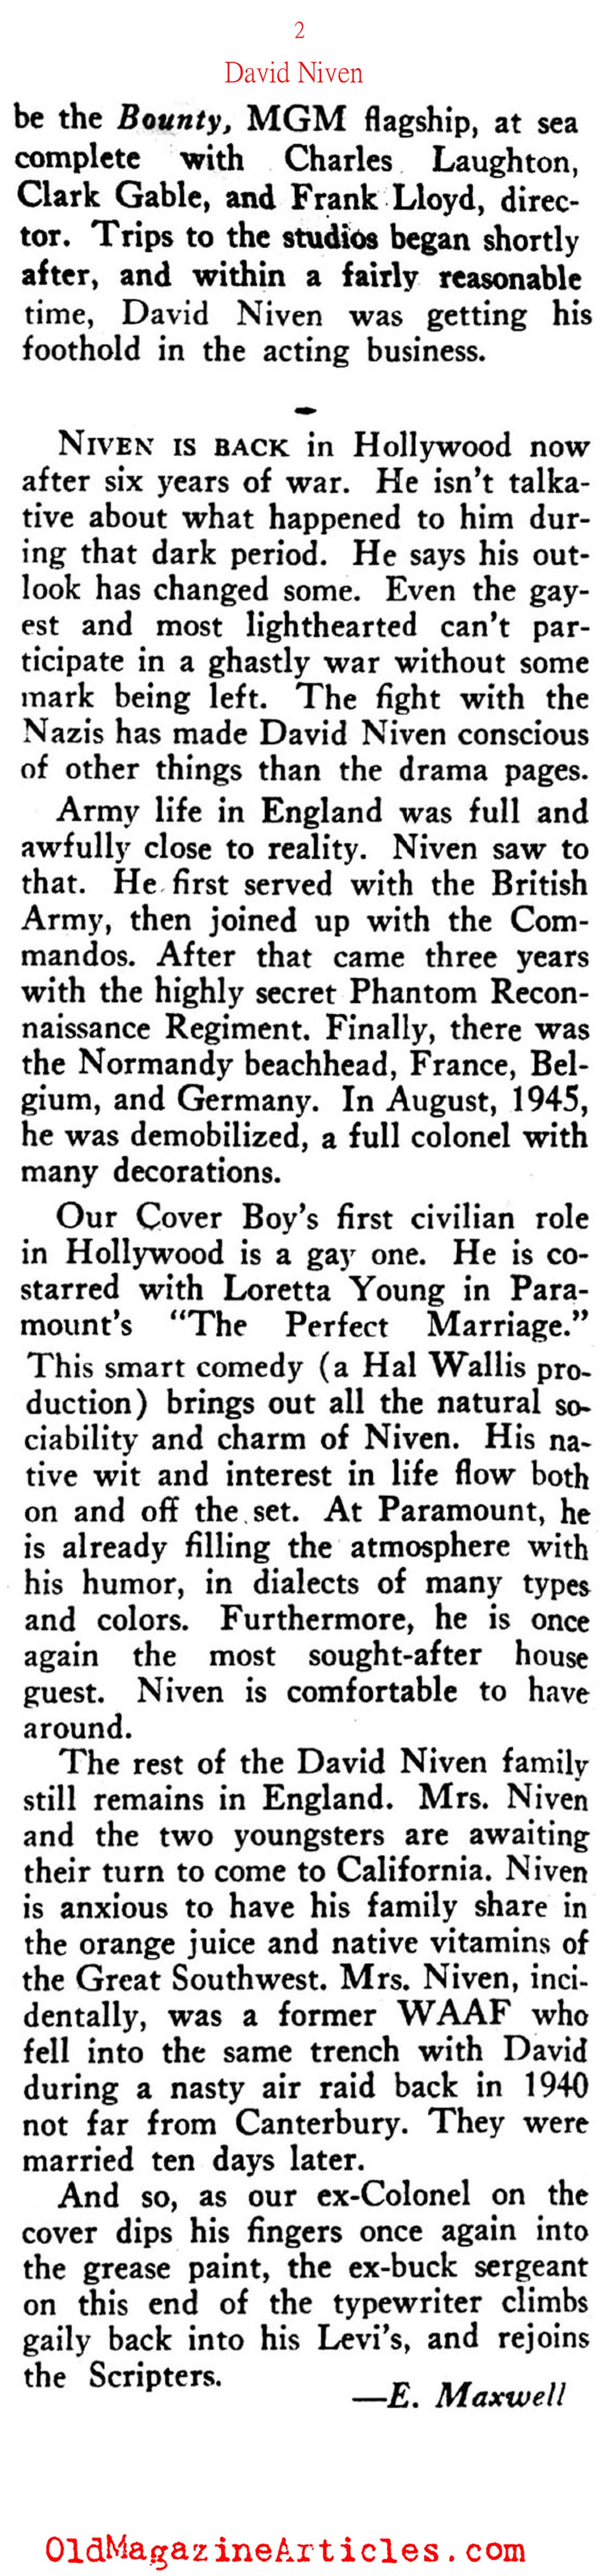 David Niven Returns to Hollywood (Rob Wagner's Script, 1946)